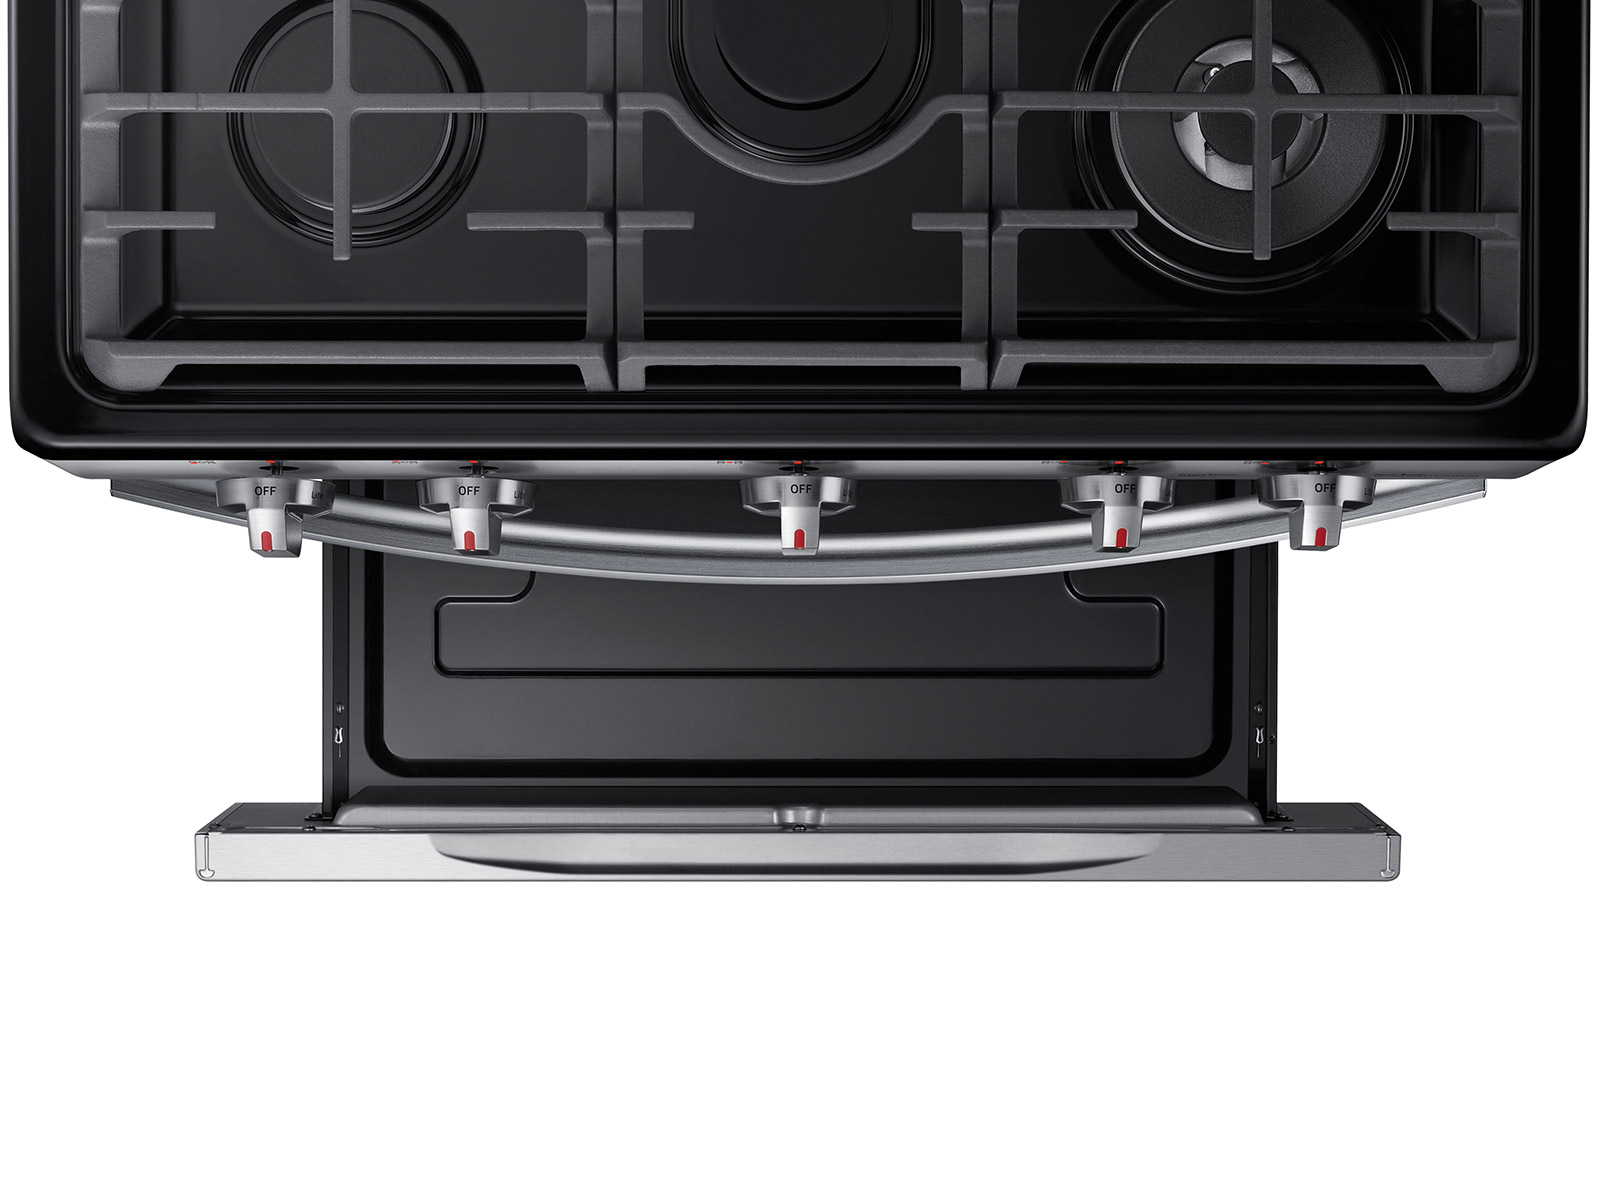 Thumbnail image of 5.8 cu. ft. Freestanding Gas Range with Air Fry and Convection in Stainless Steel